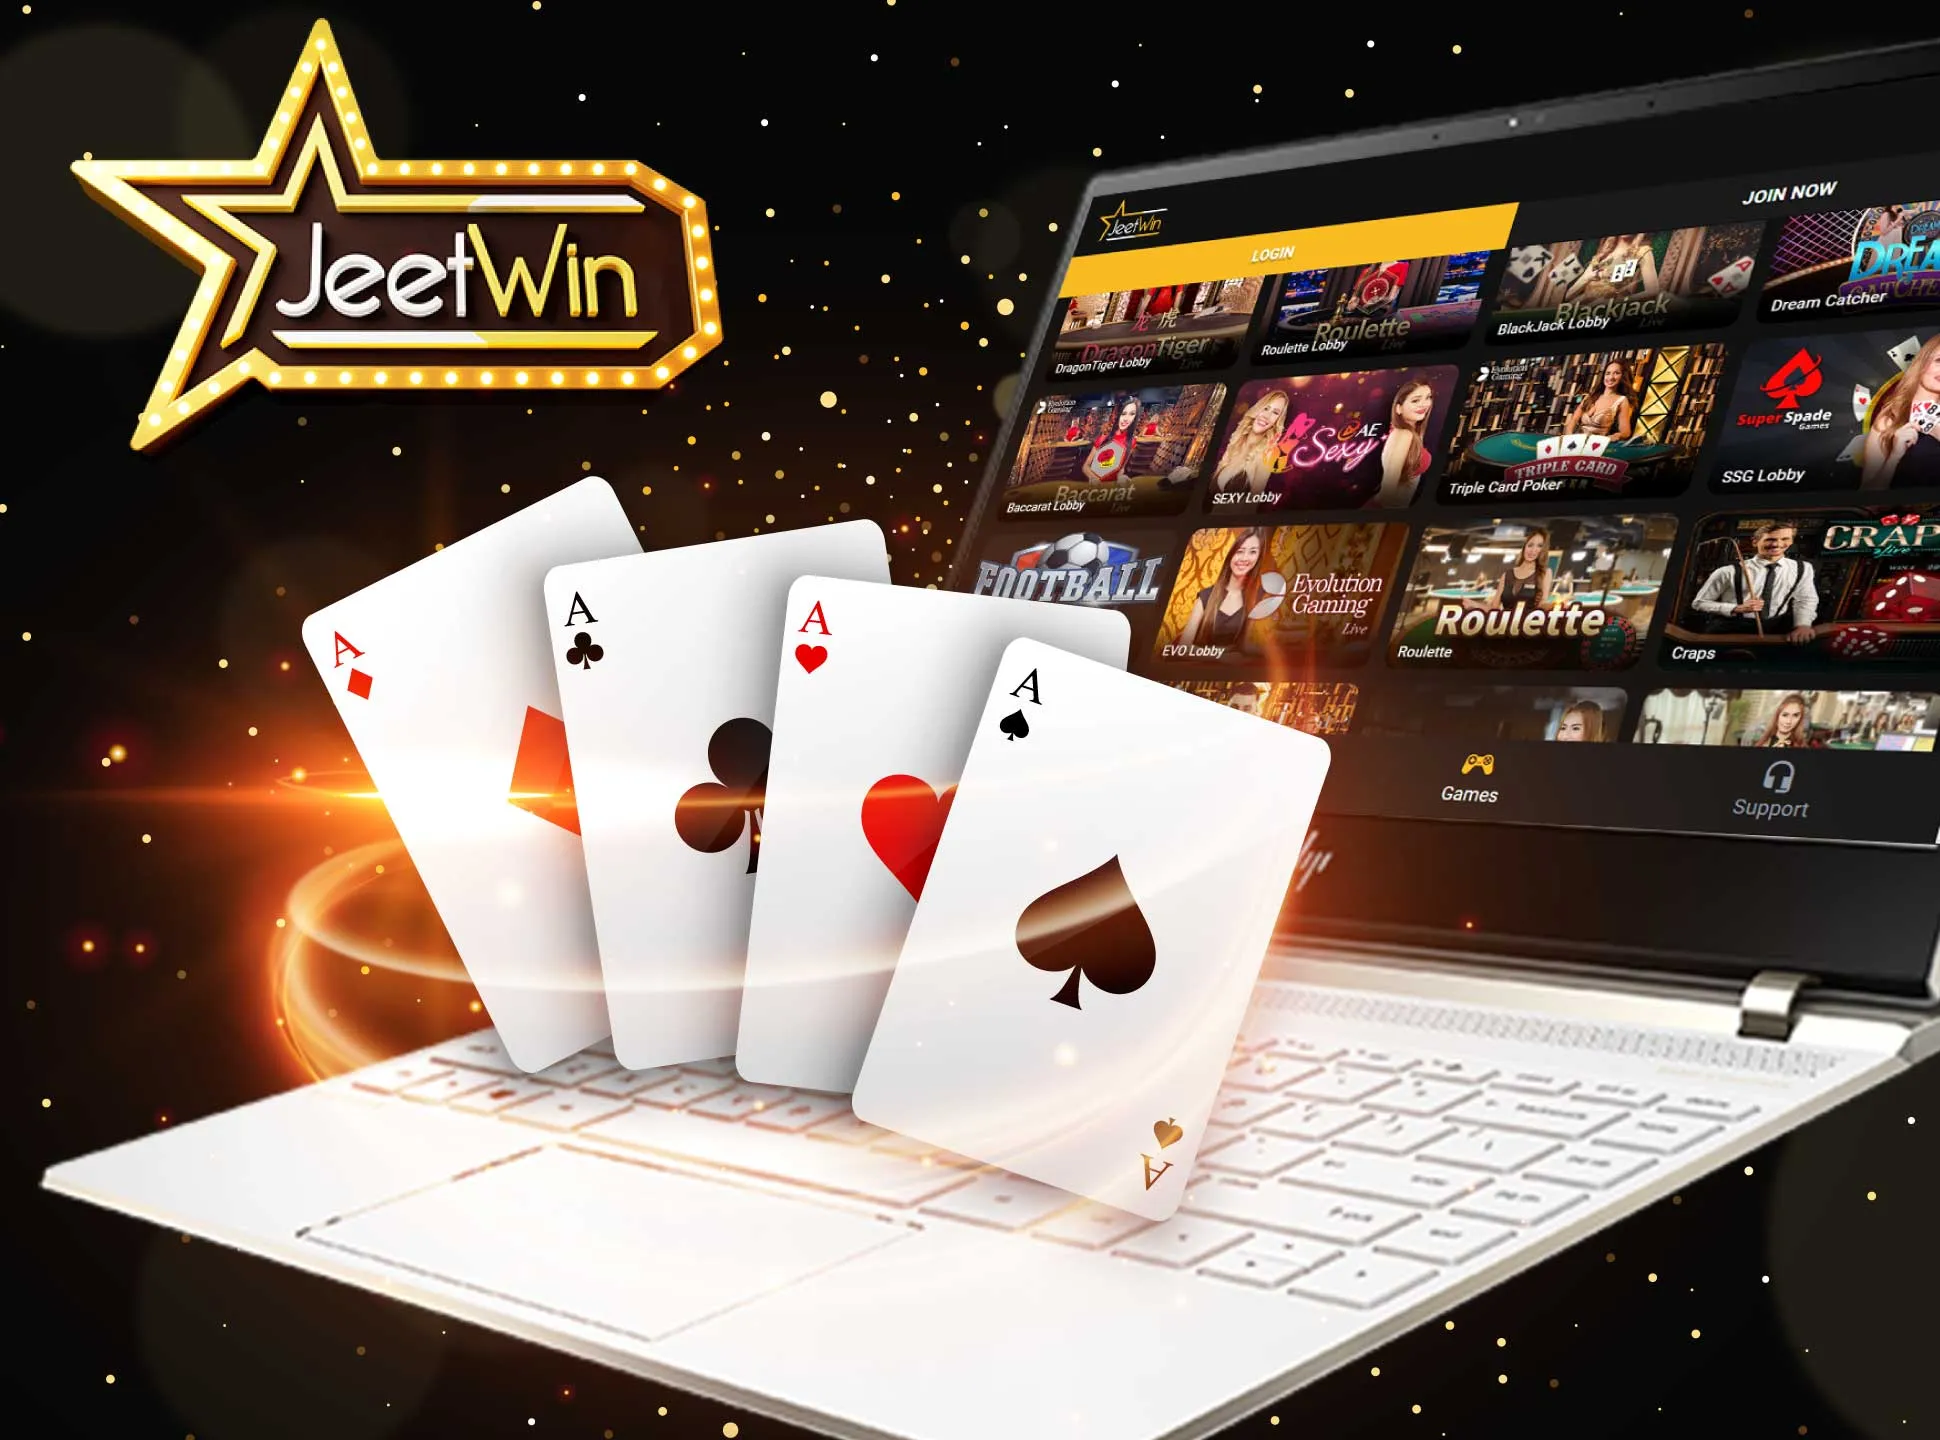 Jeetwin live casino allows playing games against the real dealer.